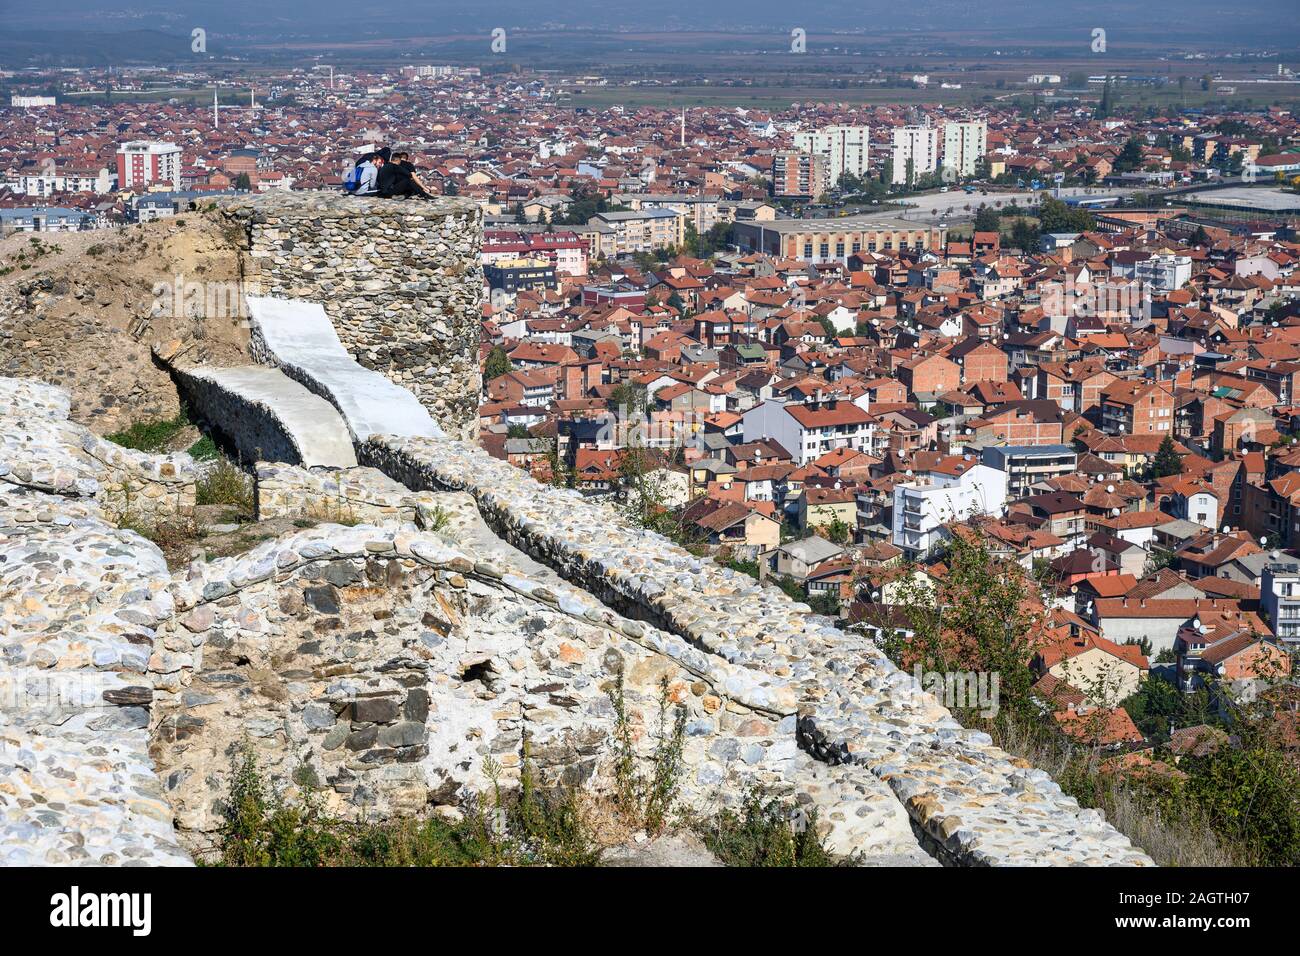 Looking down on the city of Prizren from the battlements of Dusan's fortress. Republic of Kosovo, central Balkans. Stock Photo